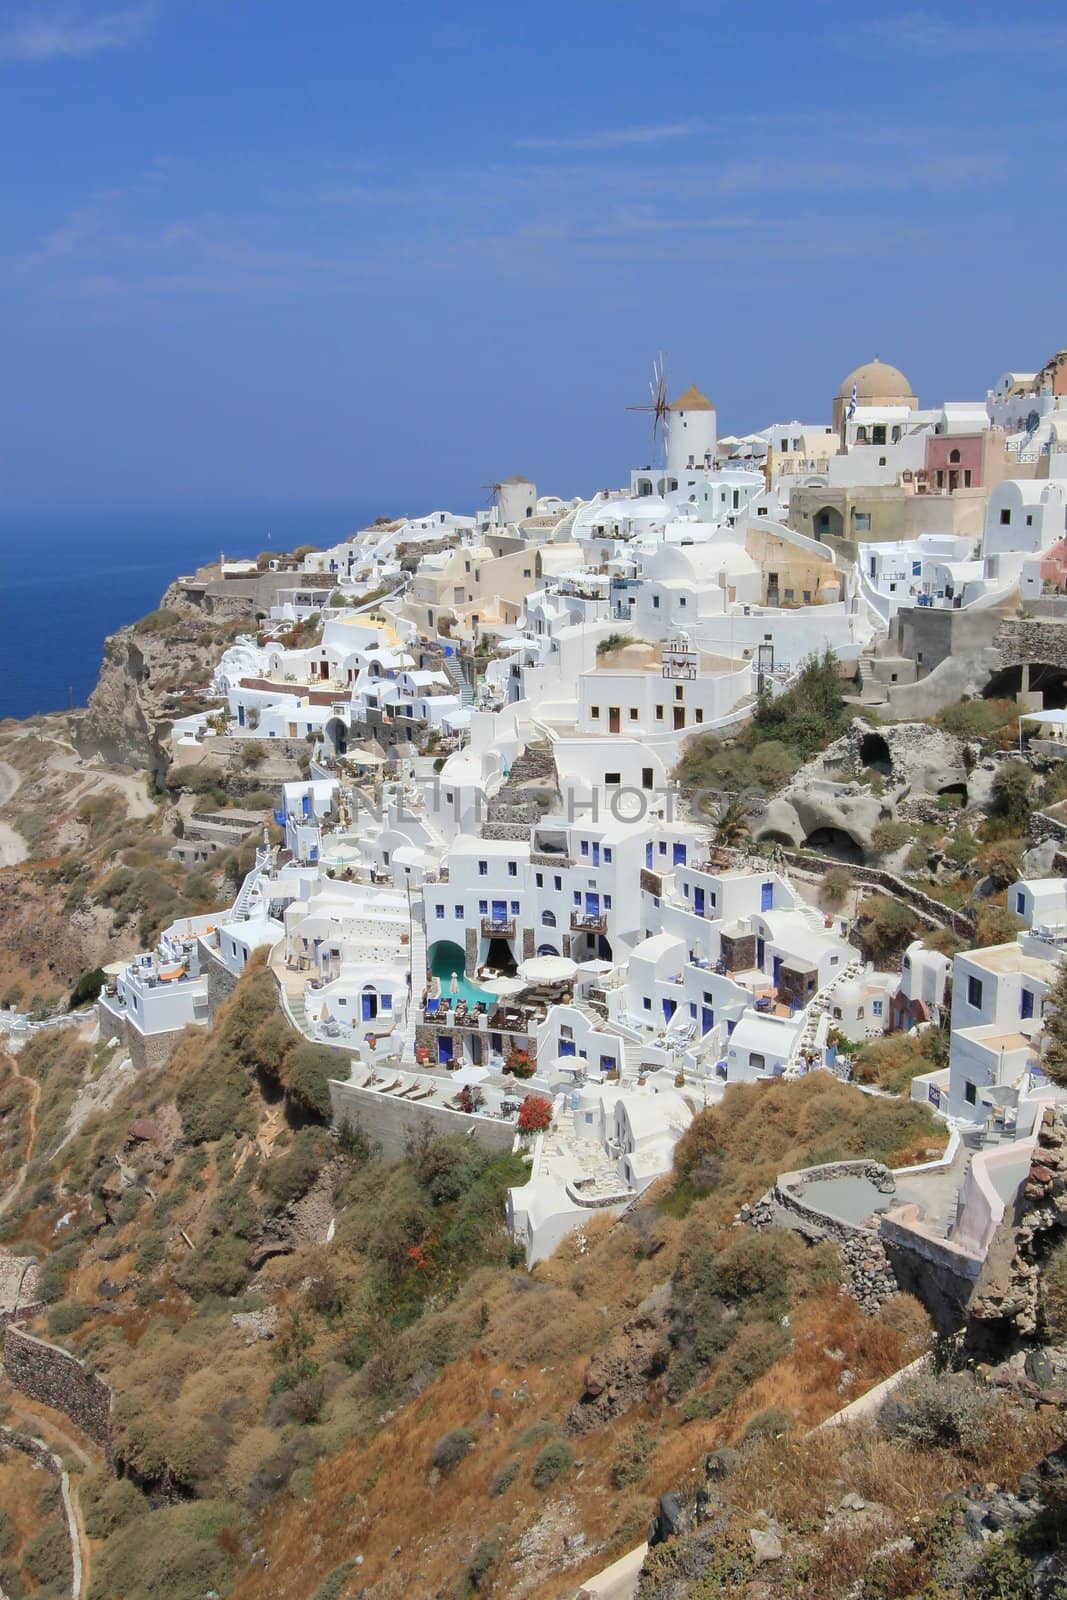 Overview on Oia village and its windmills on the island of Santorini, cyclades, Greece